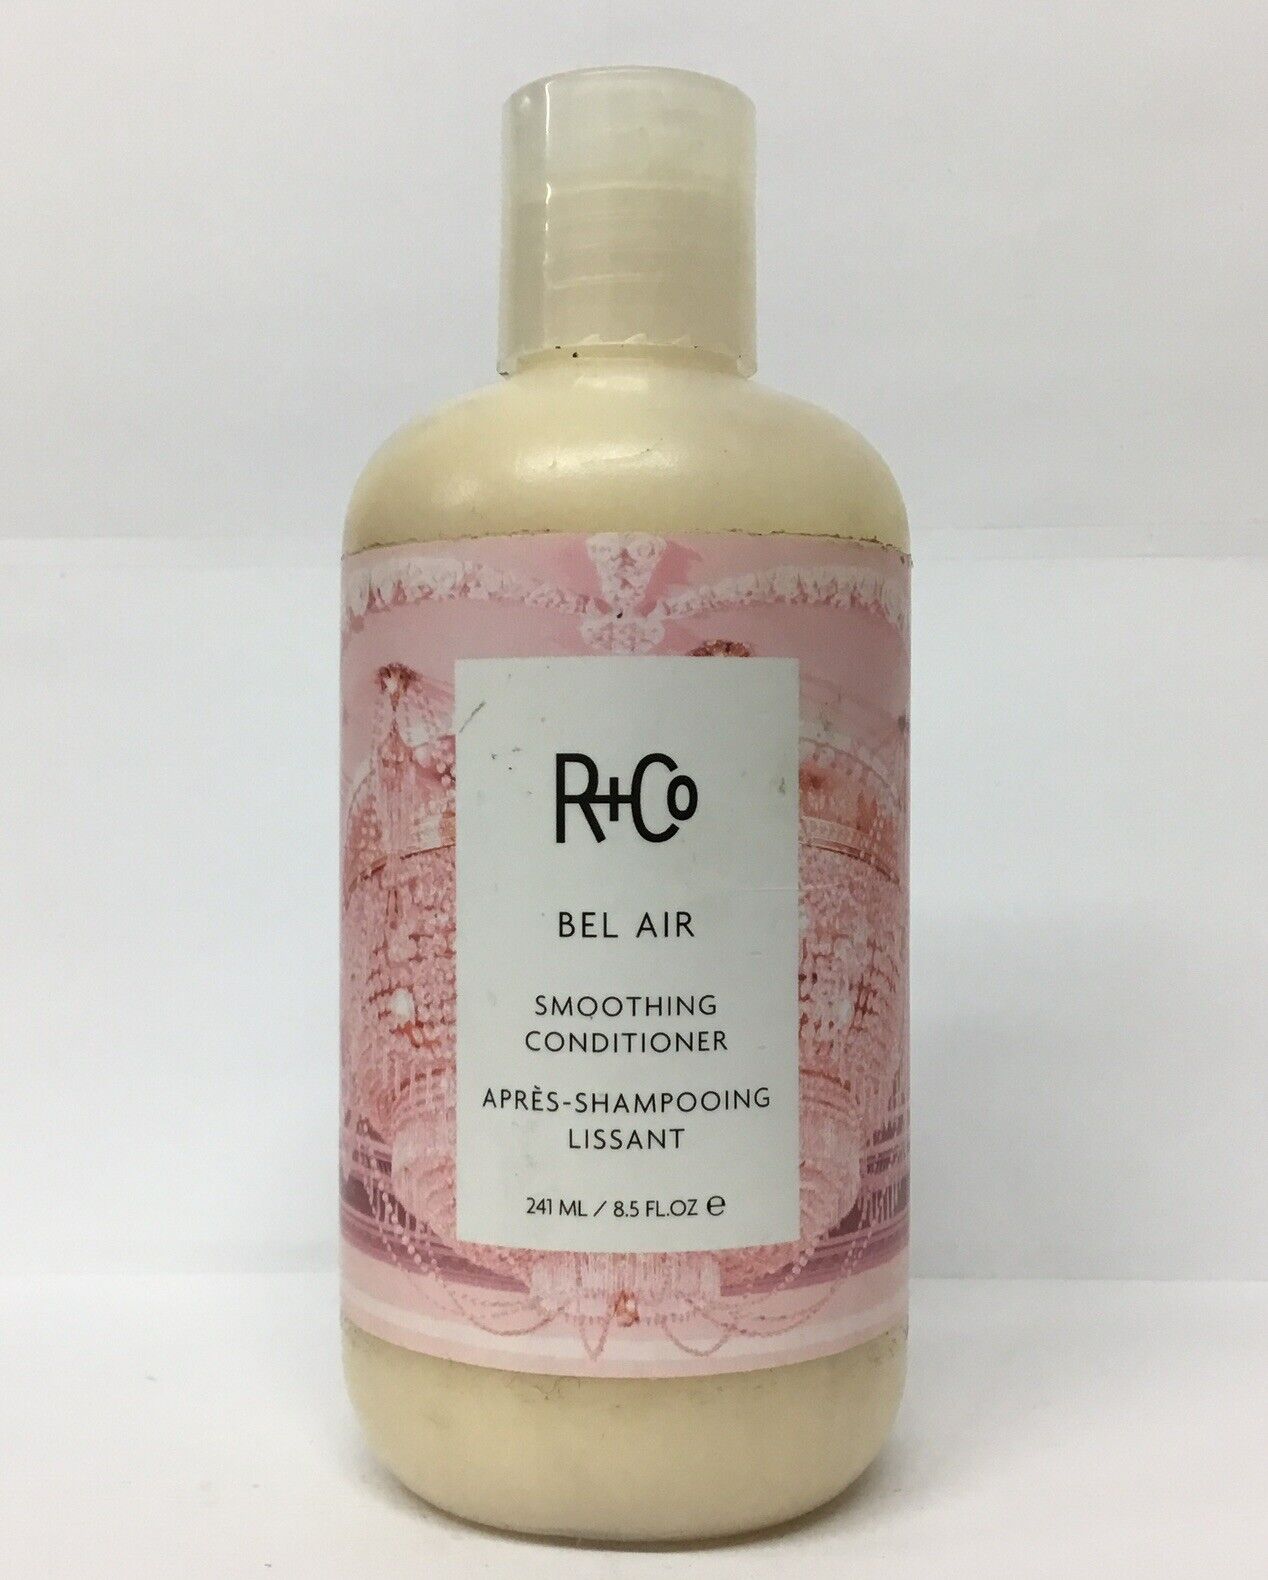 R+Co Bel Air Smoothing Conditioner | 8.5 oz | As Pictured